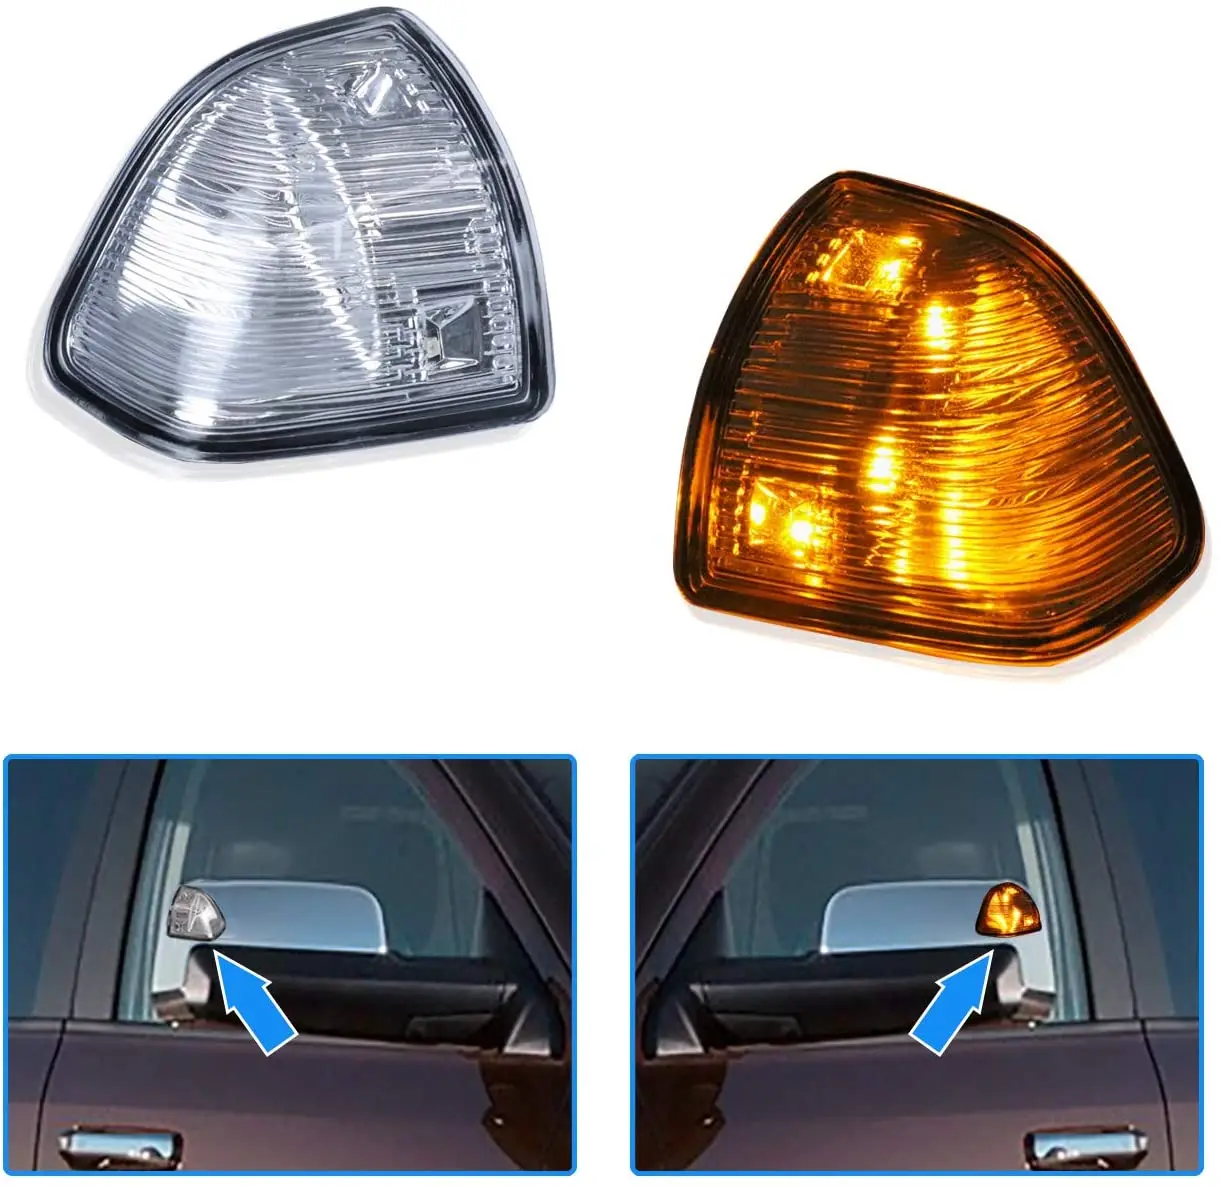 LED Outside Rear View Mirror Turn Signal Lamps Cover Lens Fit For Dodge Ram 1500 2500 3500 4500 5500 68302828AA & 68302829AA